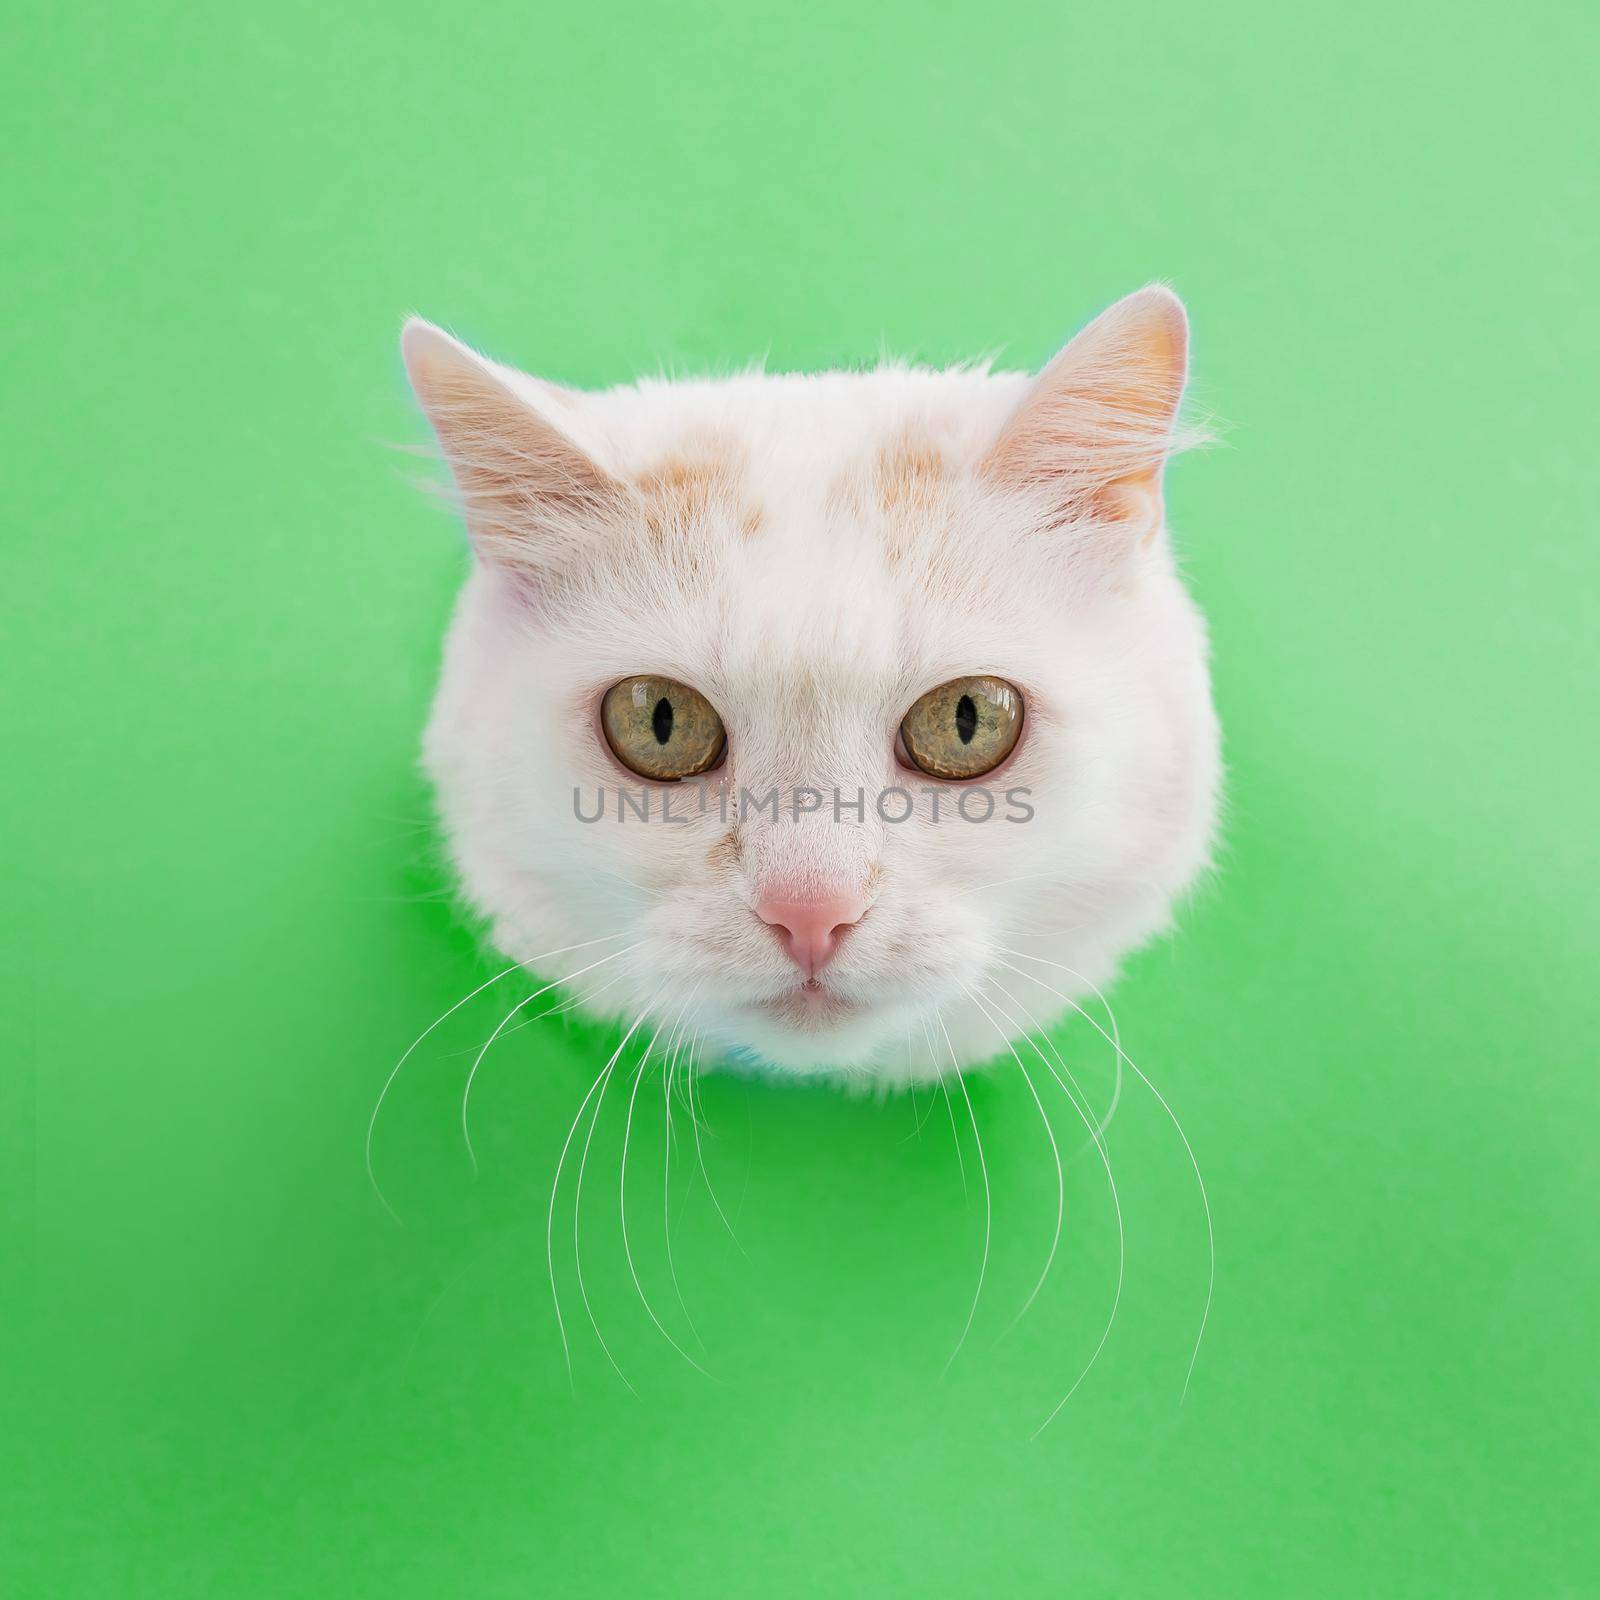 The muzzle of a white fluffy cat peeking out of a hole in a green background